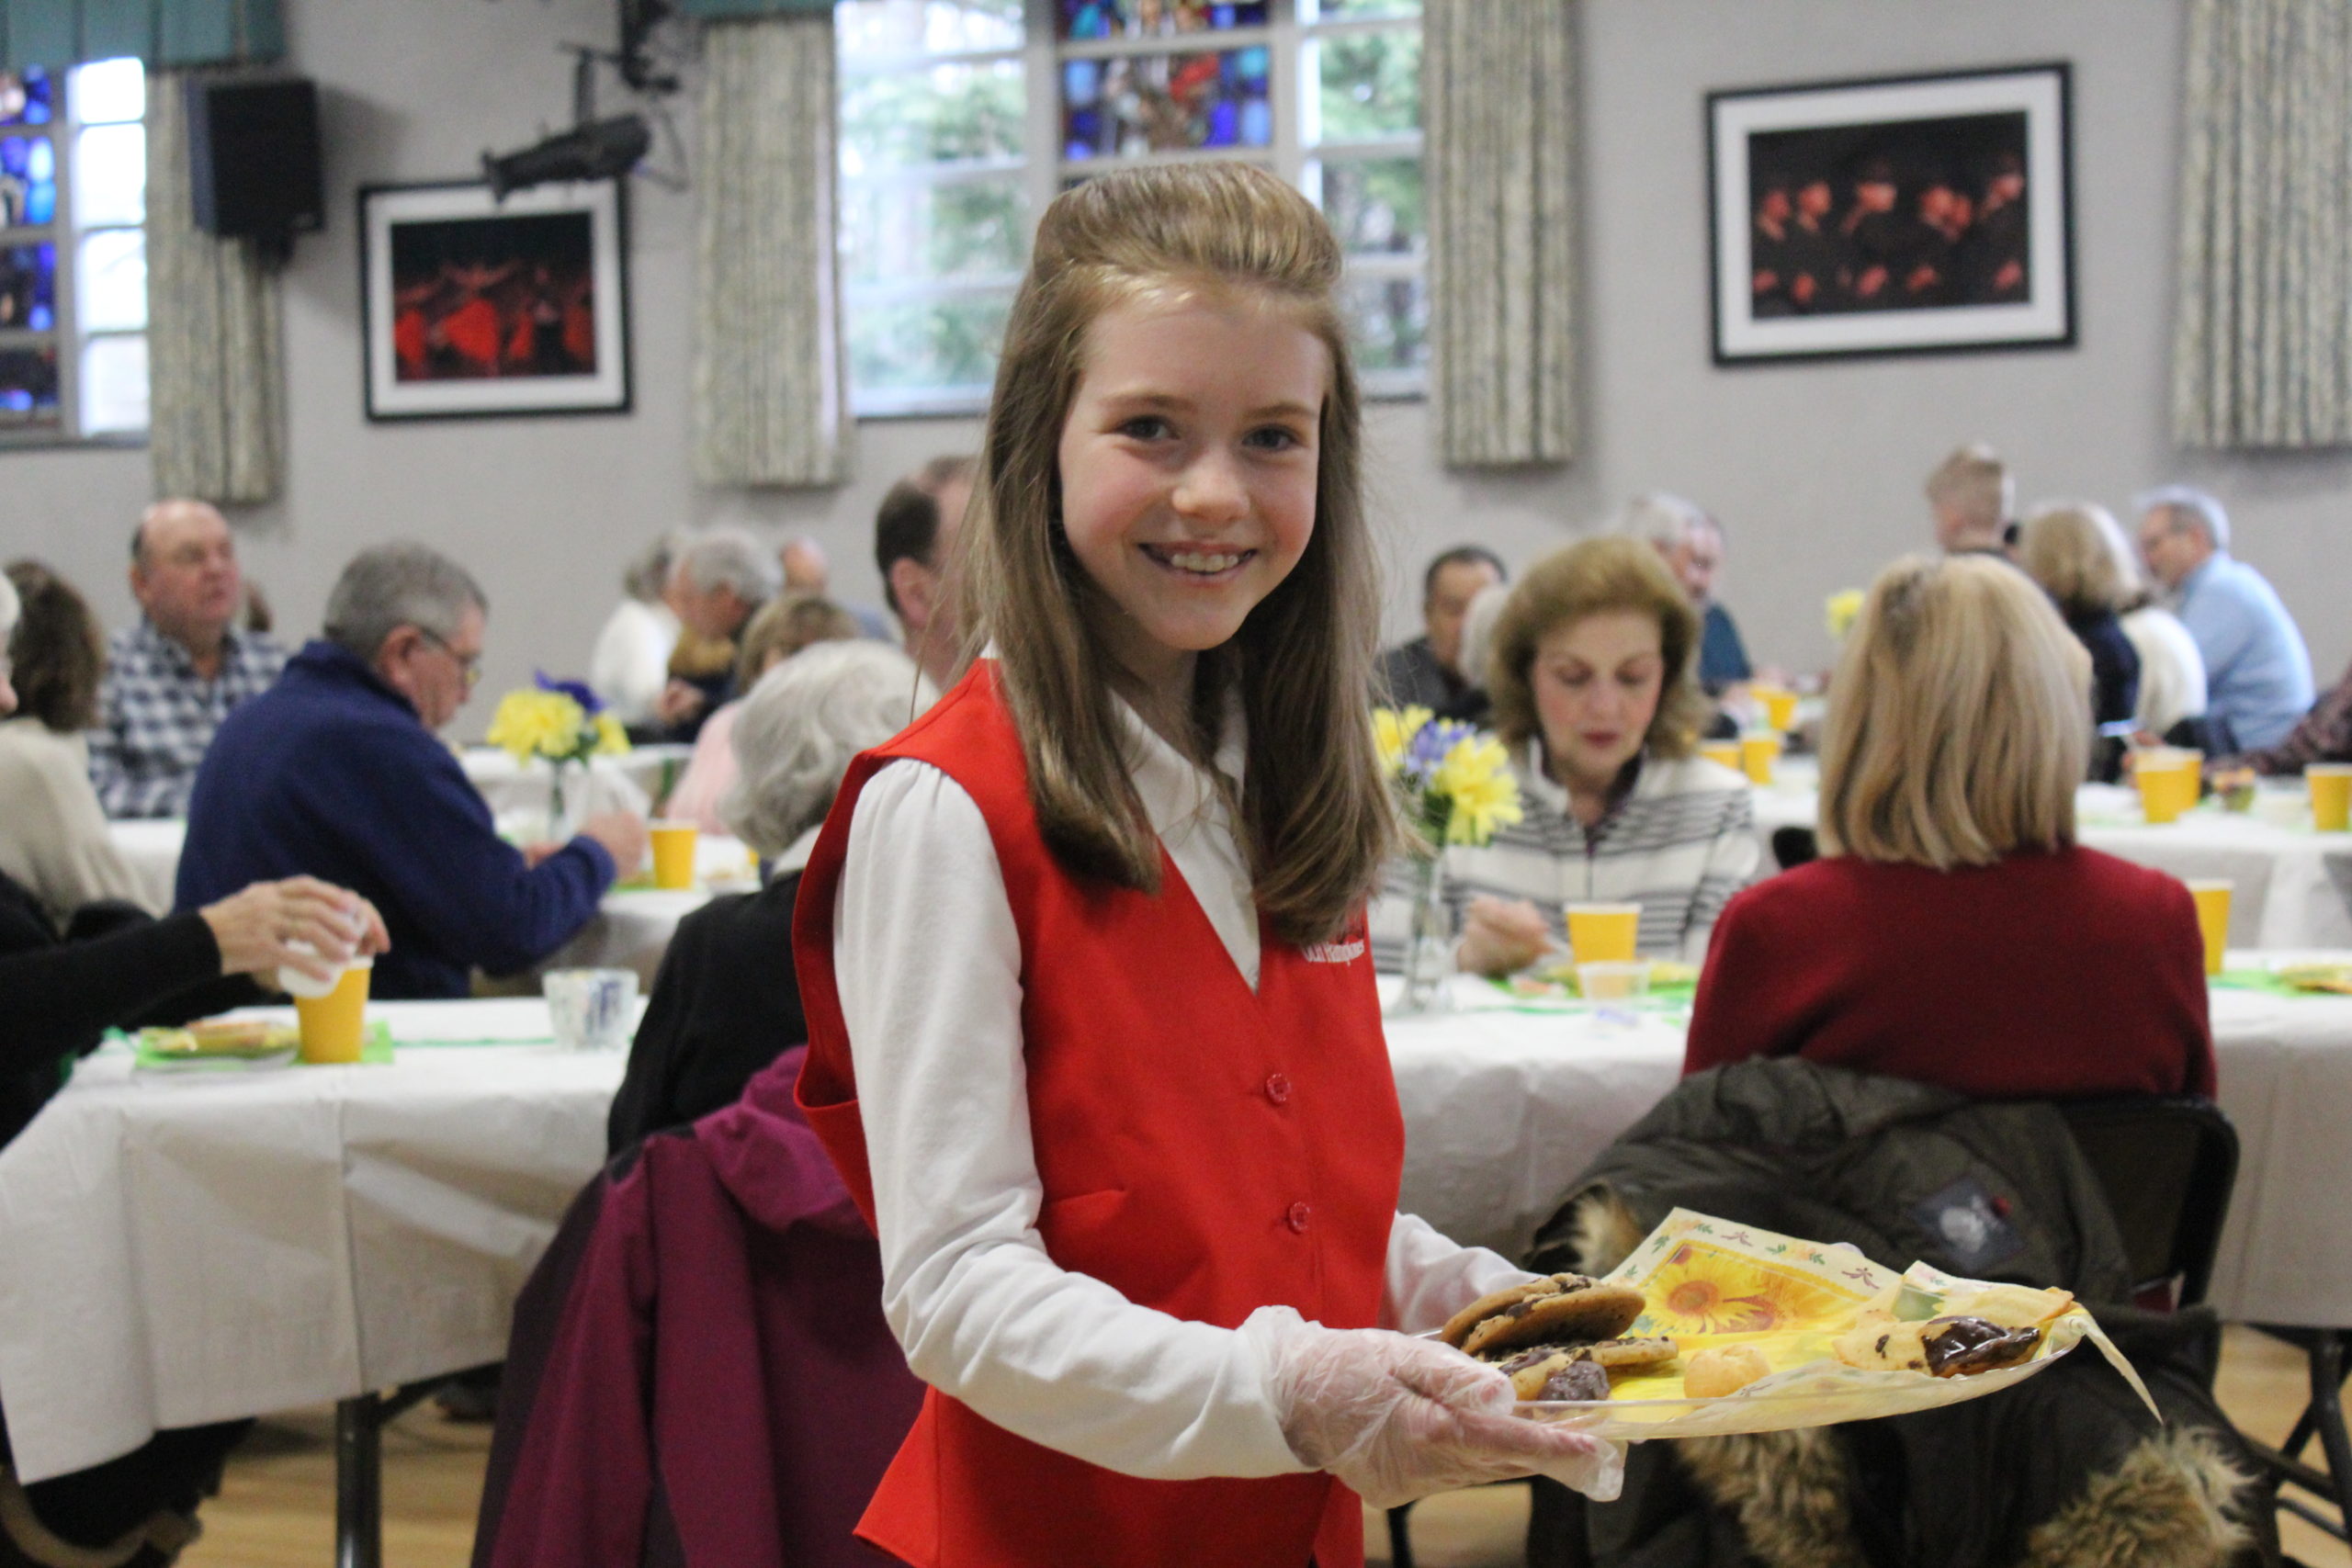 Our Lady of the Hamptons School invited students' grandparents for breakfast last weekend. At the event, fourth-grader Jaden Hoffert helped serve.